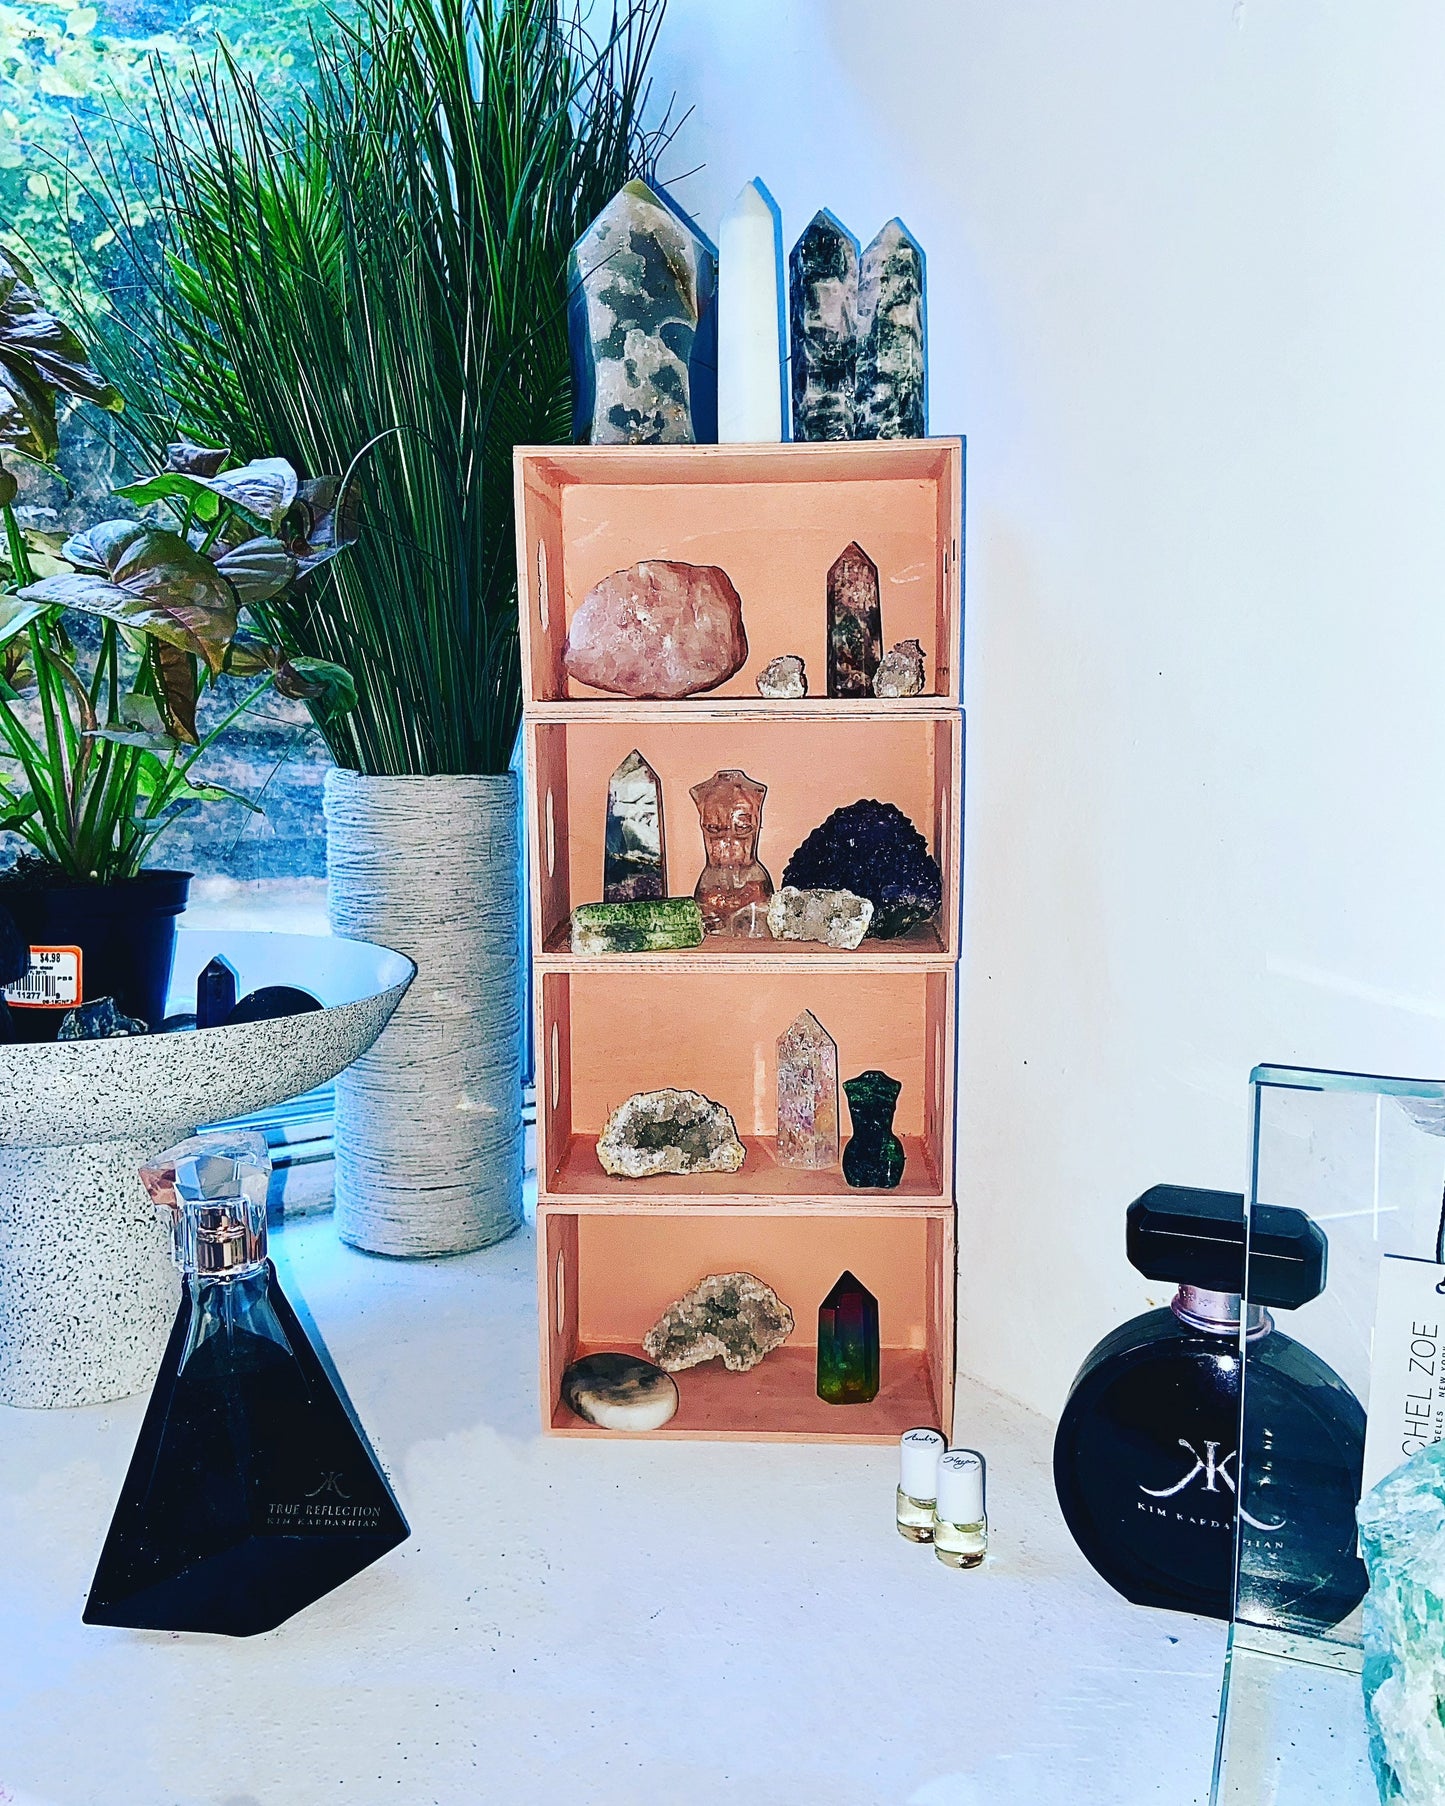 House of Crystals Display Shelf